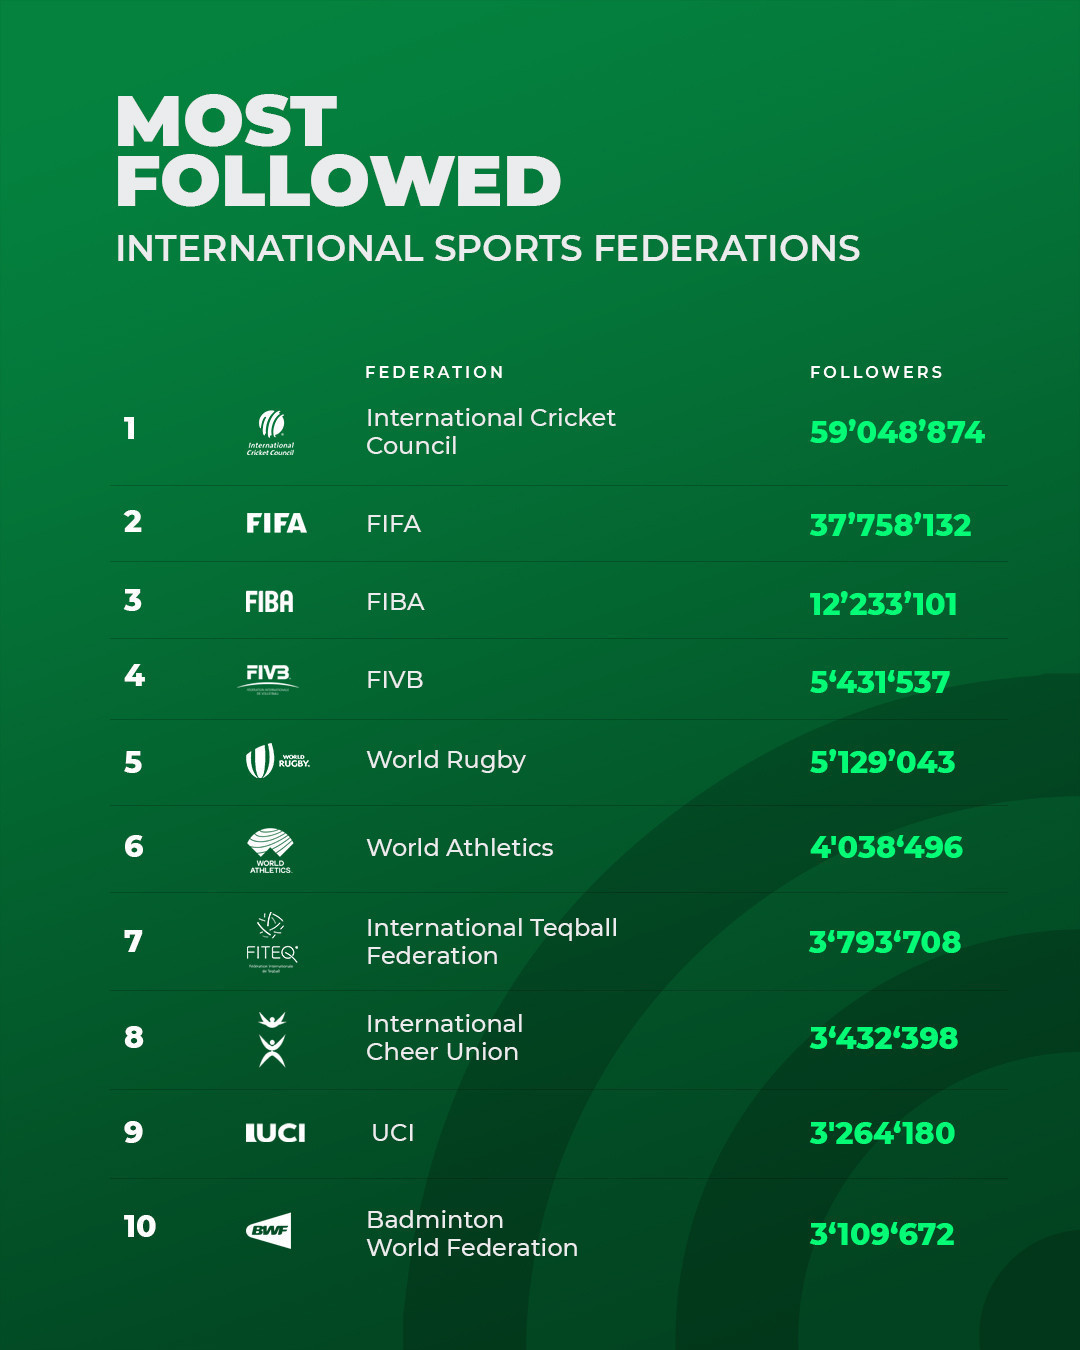 There are three non-Olympic IFs in the top 10 of the BCW International Sports Federation Social Media Ranking ©BCW